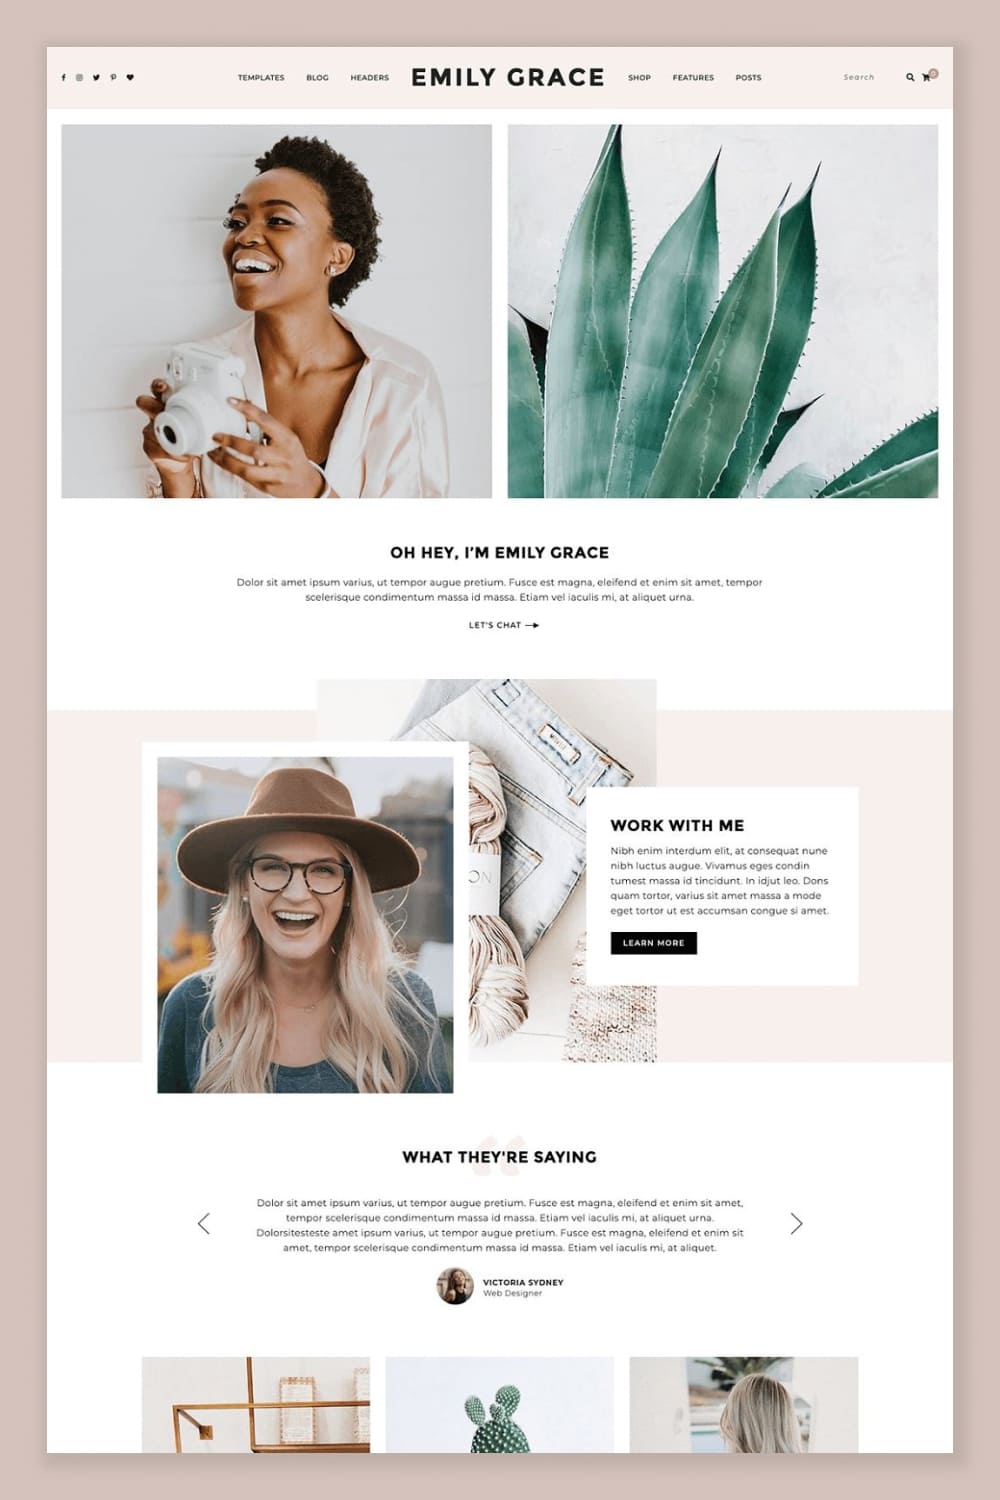 Pastel colors and simple design will a good solution for a personal page or business.